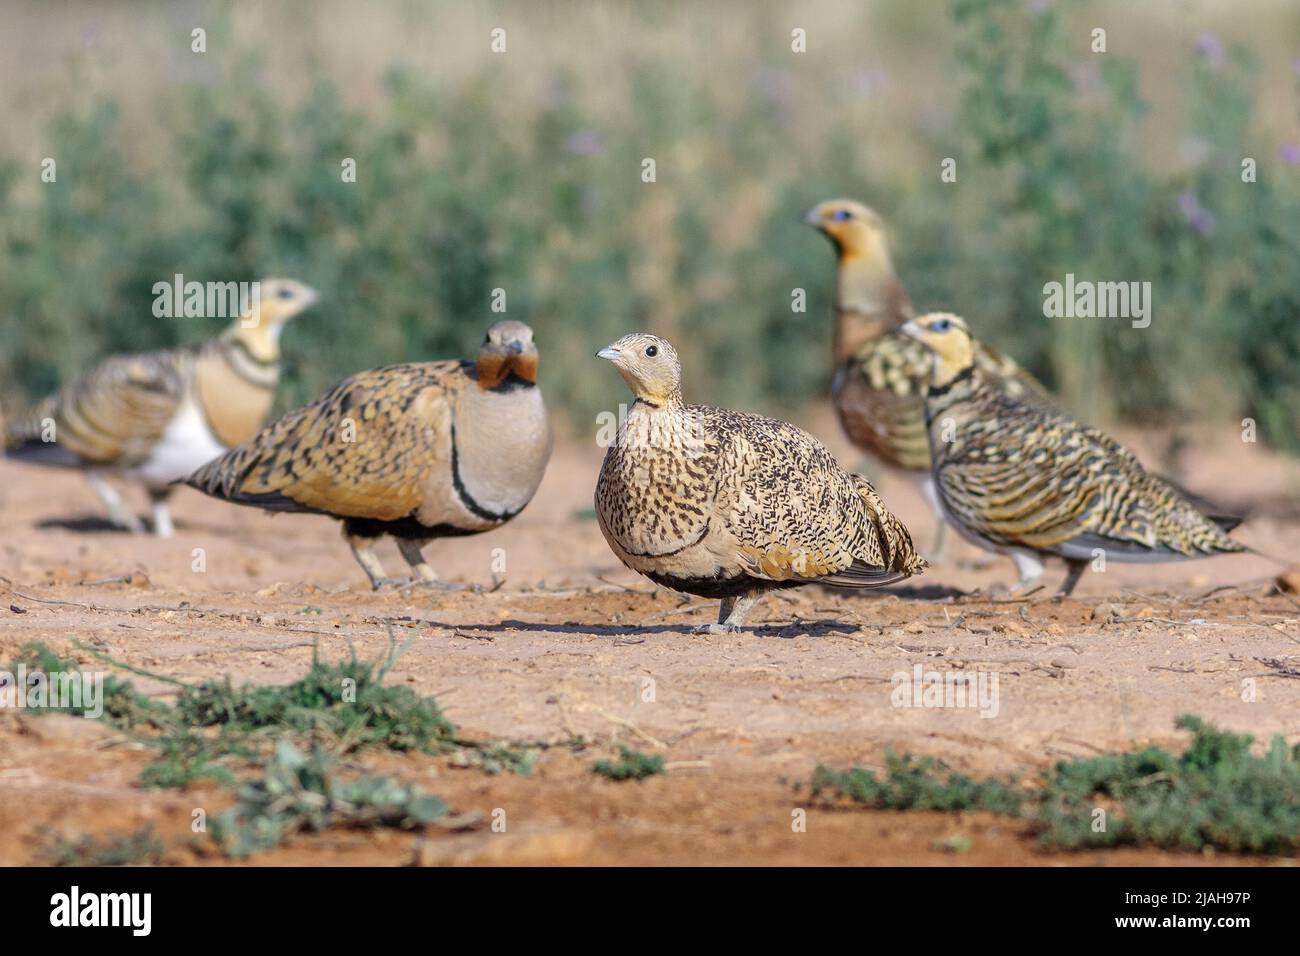 Pin-tailed sandgrouses,Pterocles alchata, and black-bellied sandgrouses,Pterocles orientalis, Monegros desert, Aragon, Spain Stock Photo